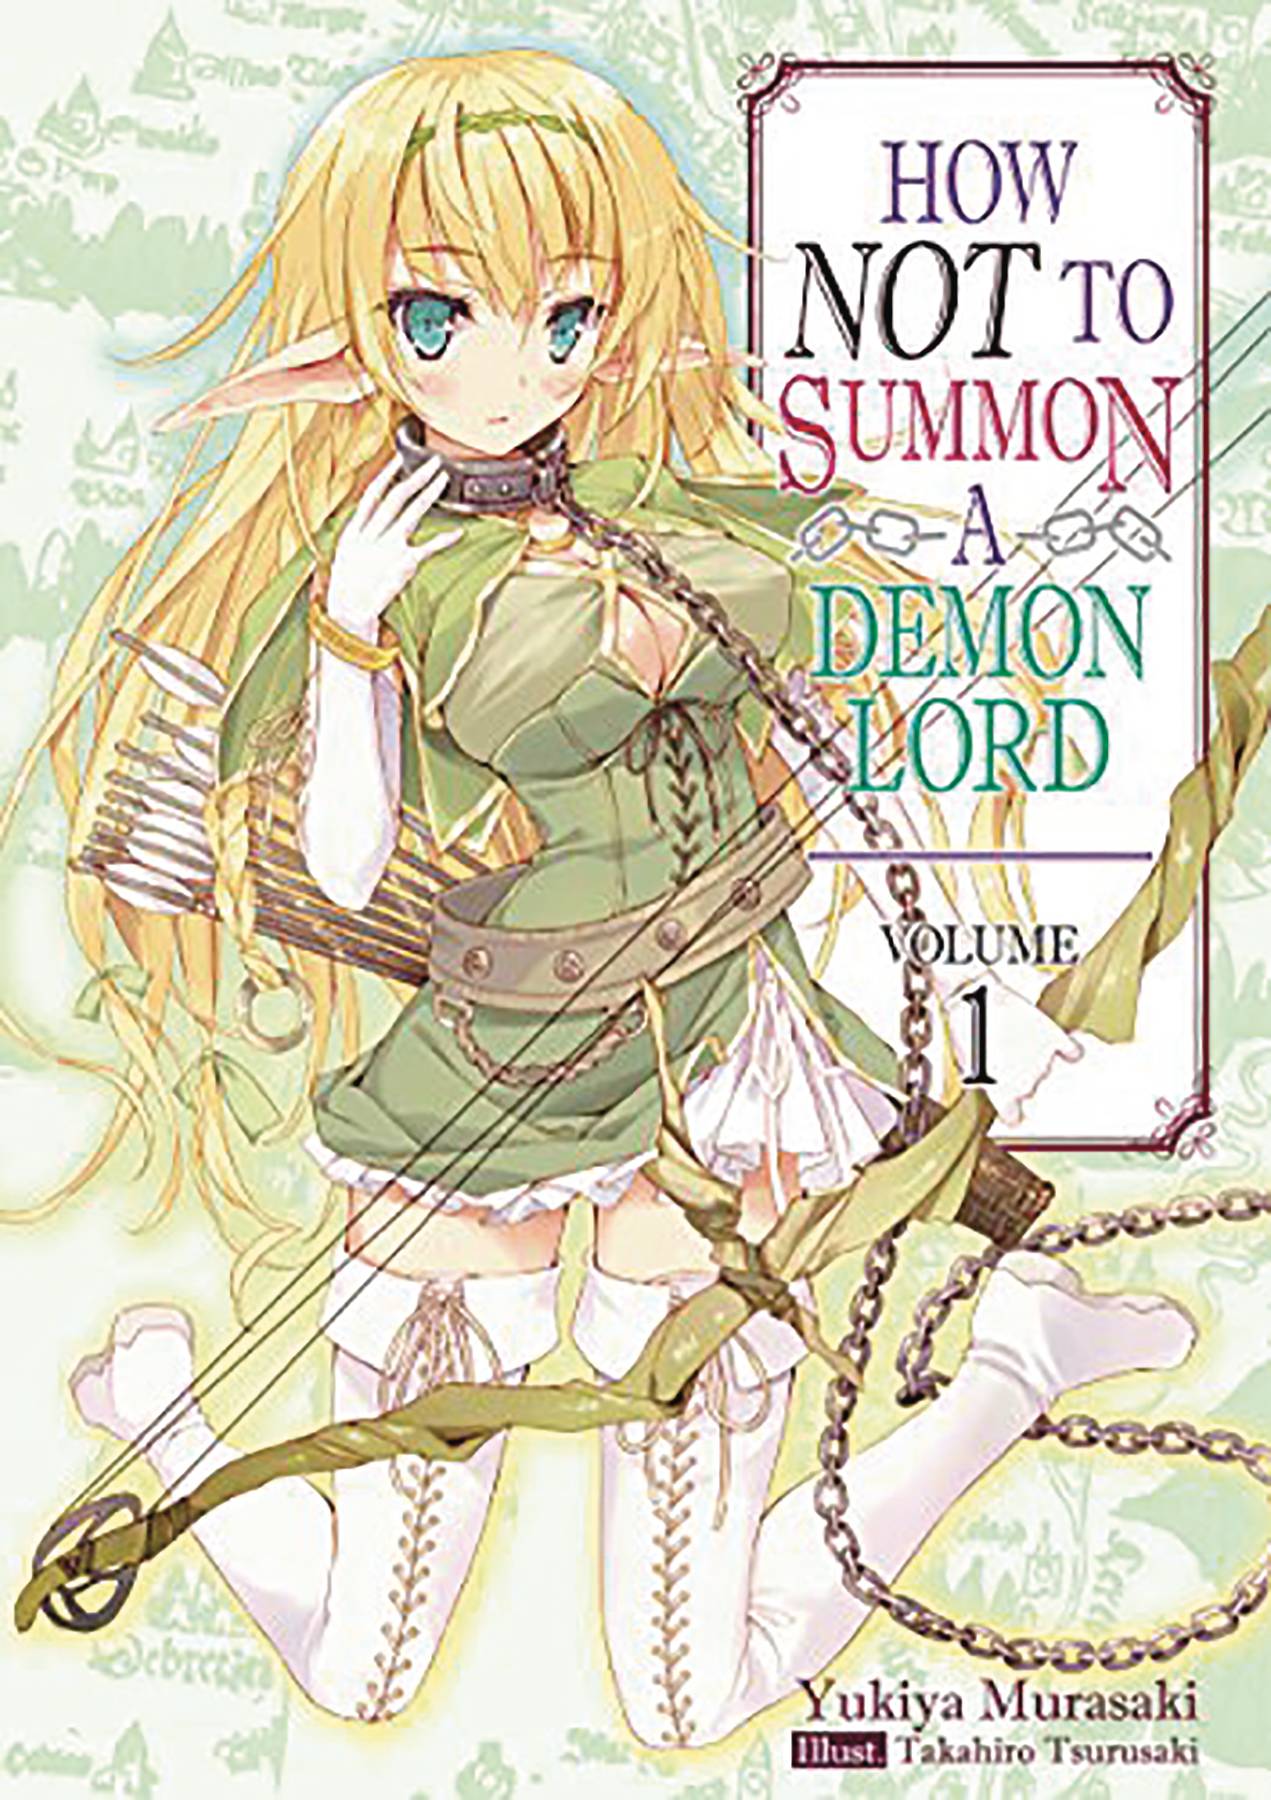 How not to Summon a Demon Lord Manga Volume 1